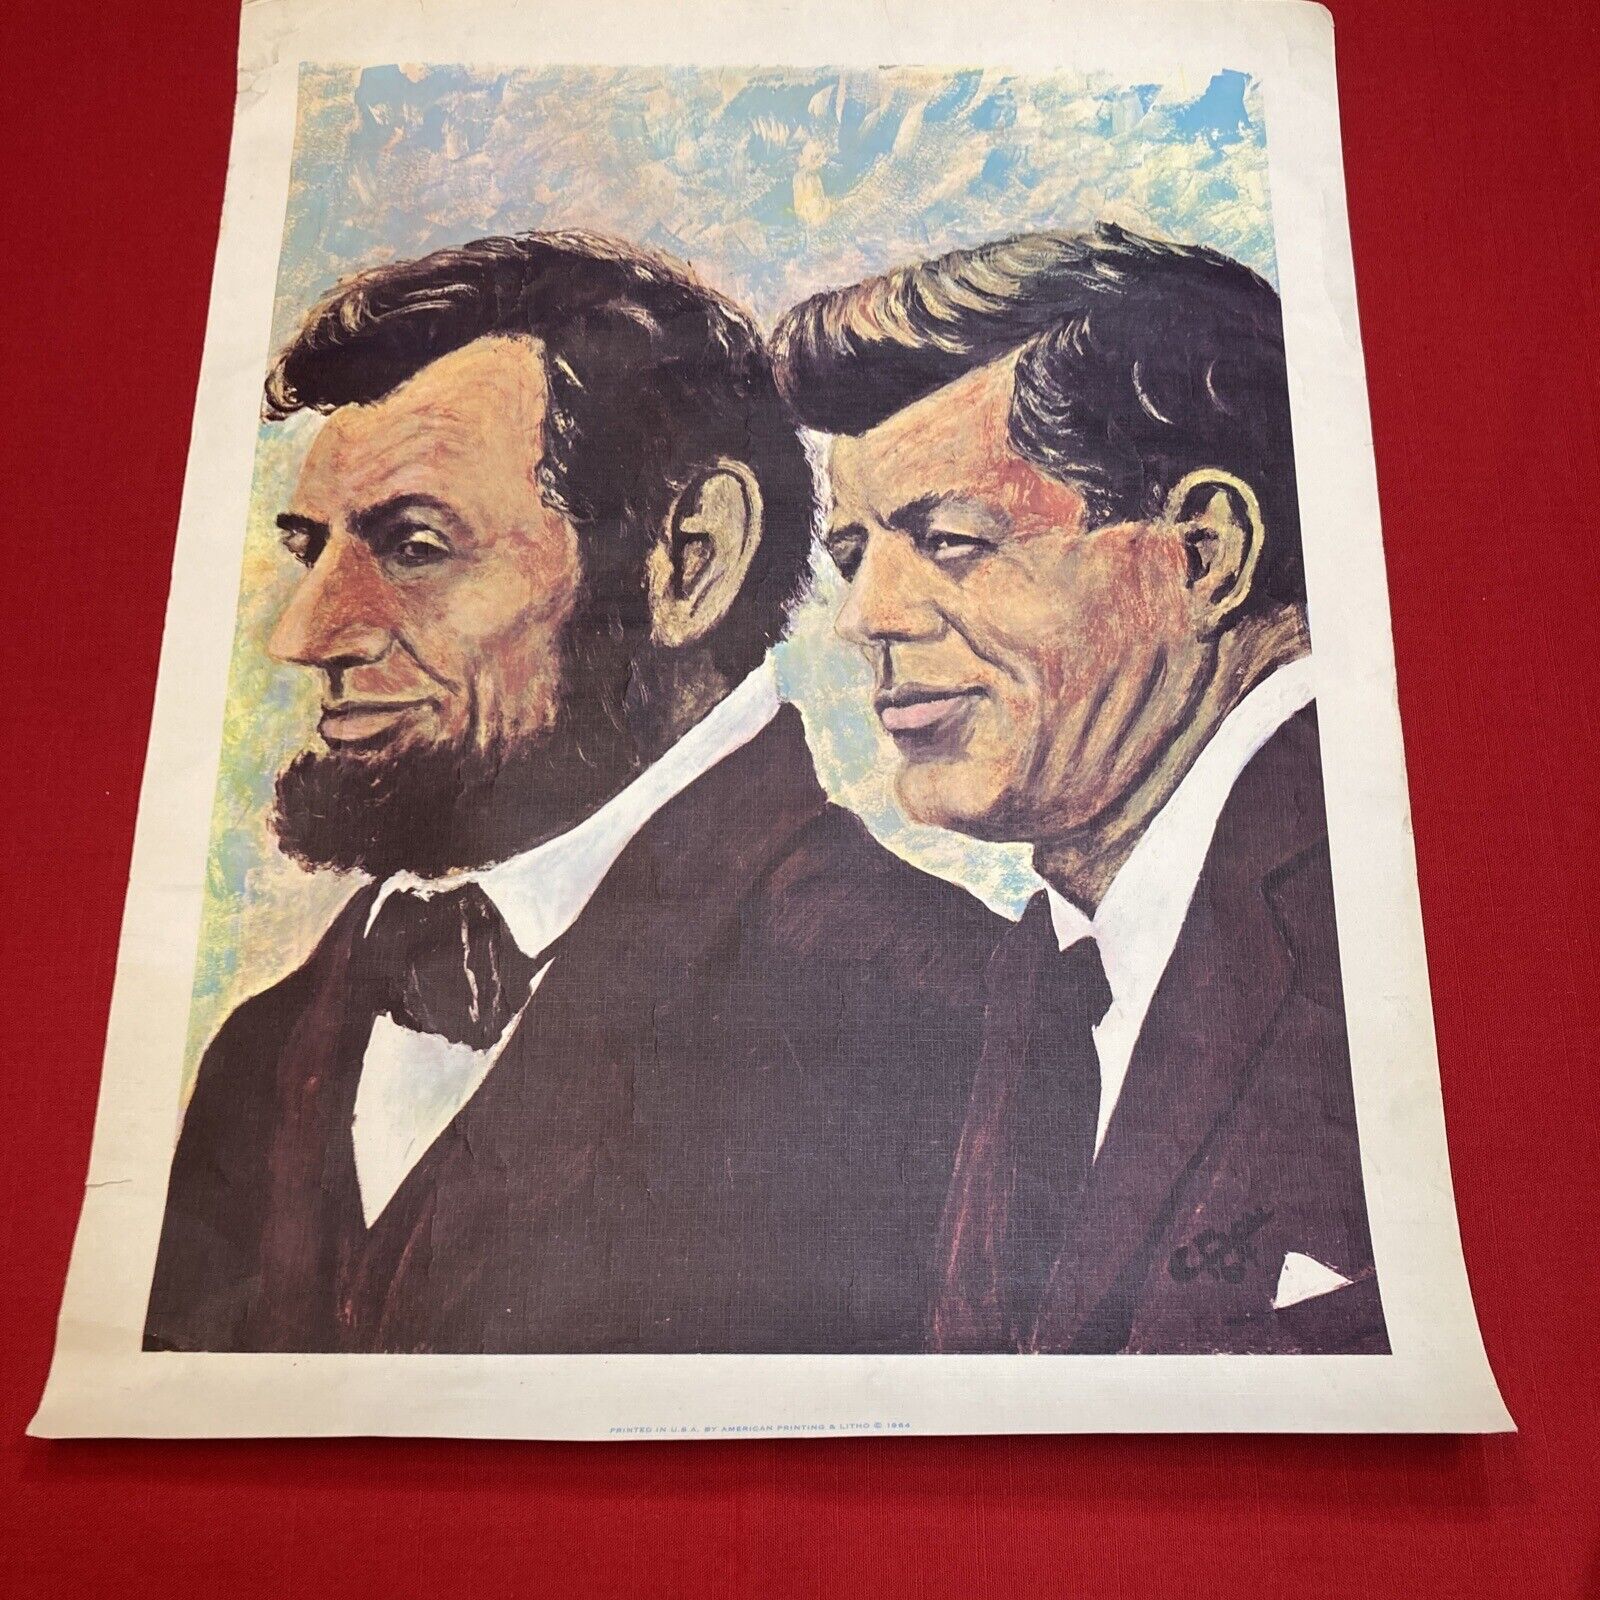 Poster Print Of Presidents Lincoln And Kennedy 1964.  Very Rare. 20 X 16”.